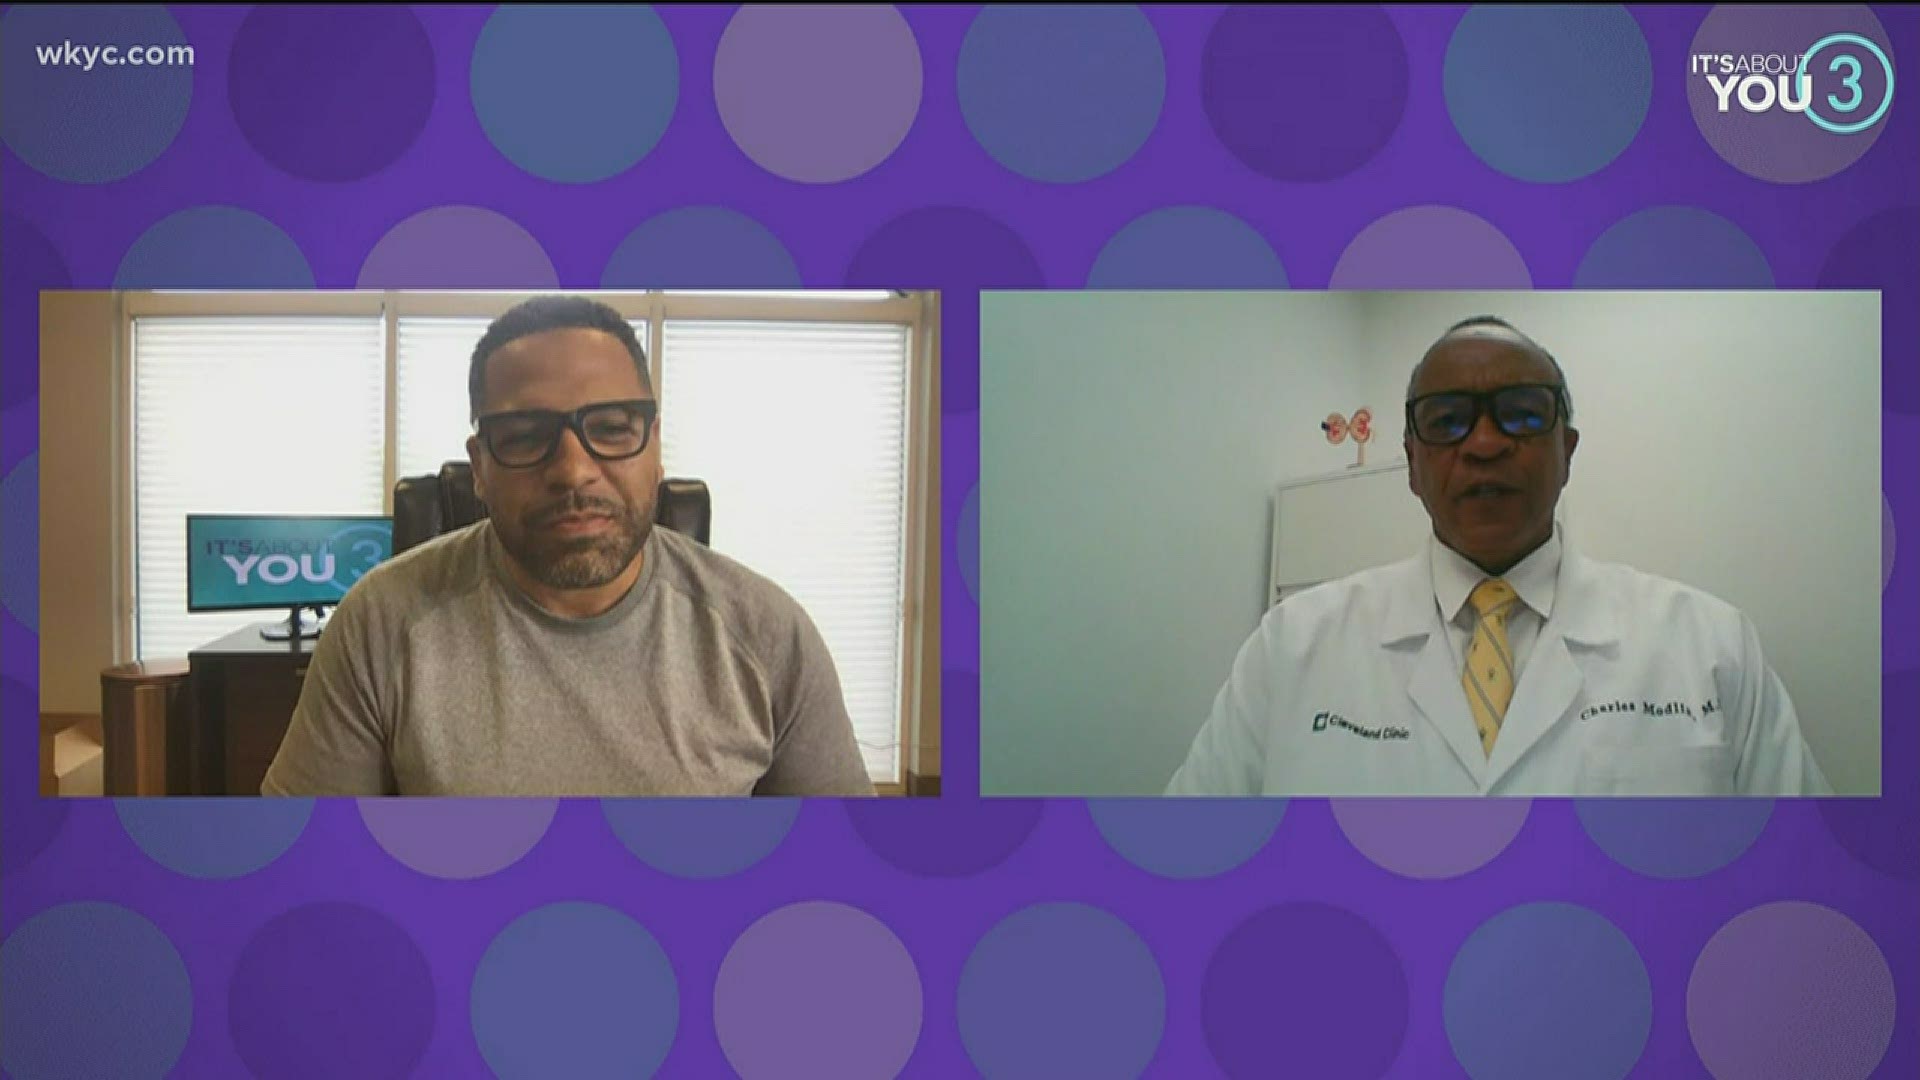 Larry Macon Jr. is back with another segment of Everyday Champion! He talks with Dr. Charles Modlin about how important our first responders and caregivers are